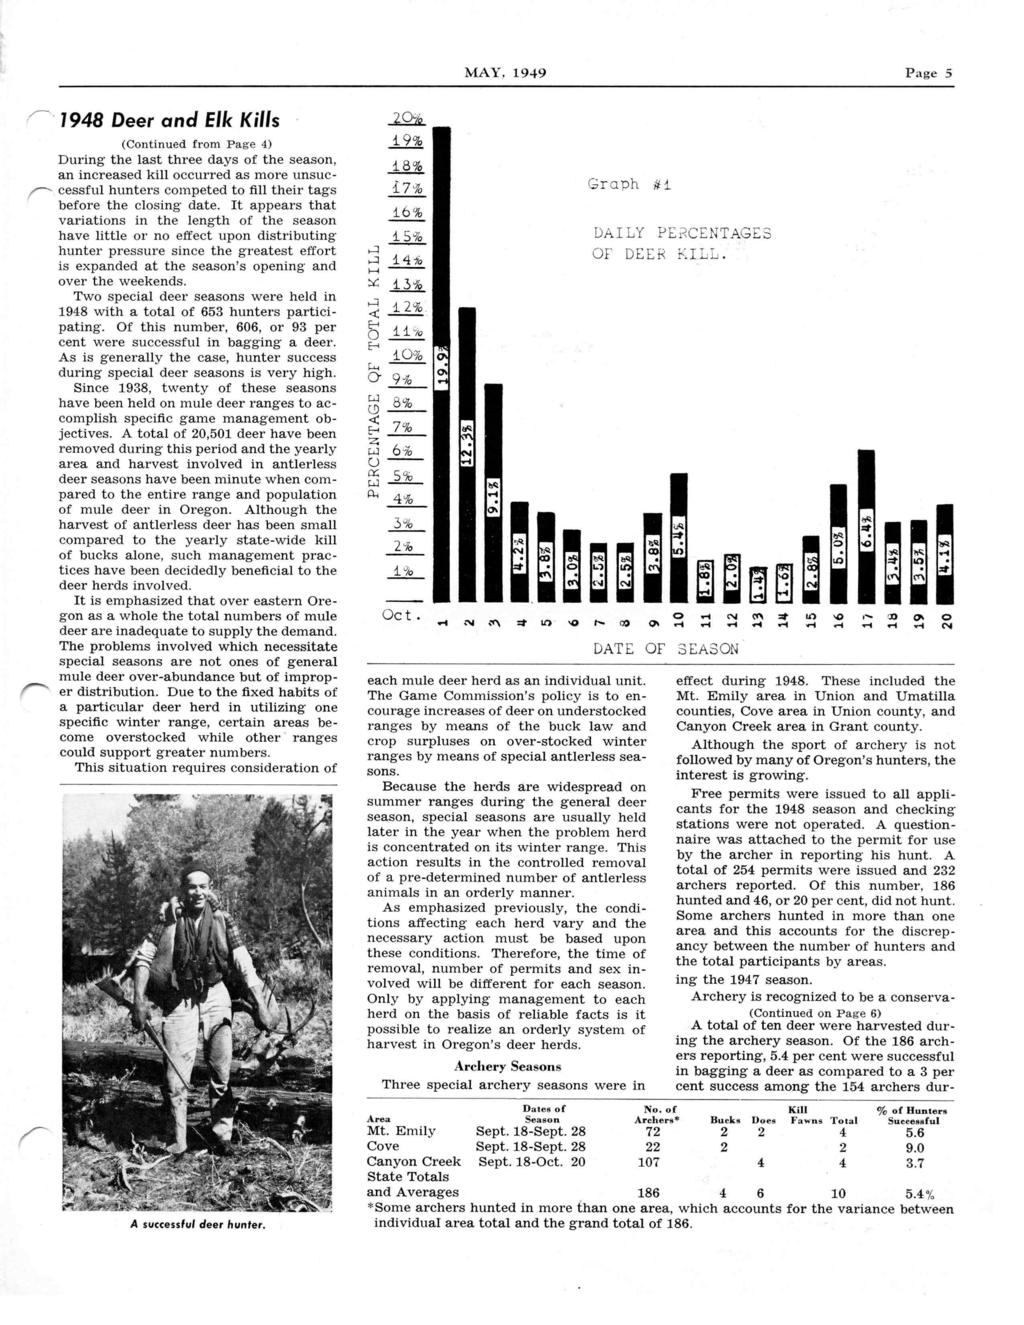 MAY. 1949 Page 5 1948 Deer and Elk Kills (Continued from Page 4) During the last three days of the season, an increased kill occurred as more unsuccessful hunters competed to fill their tags before